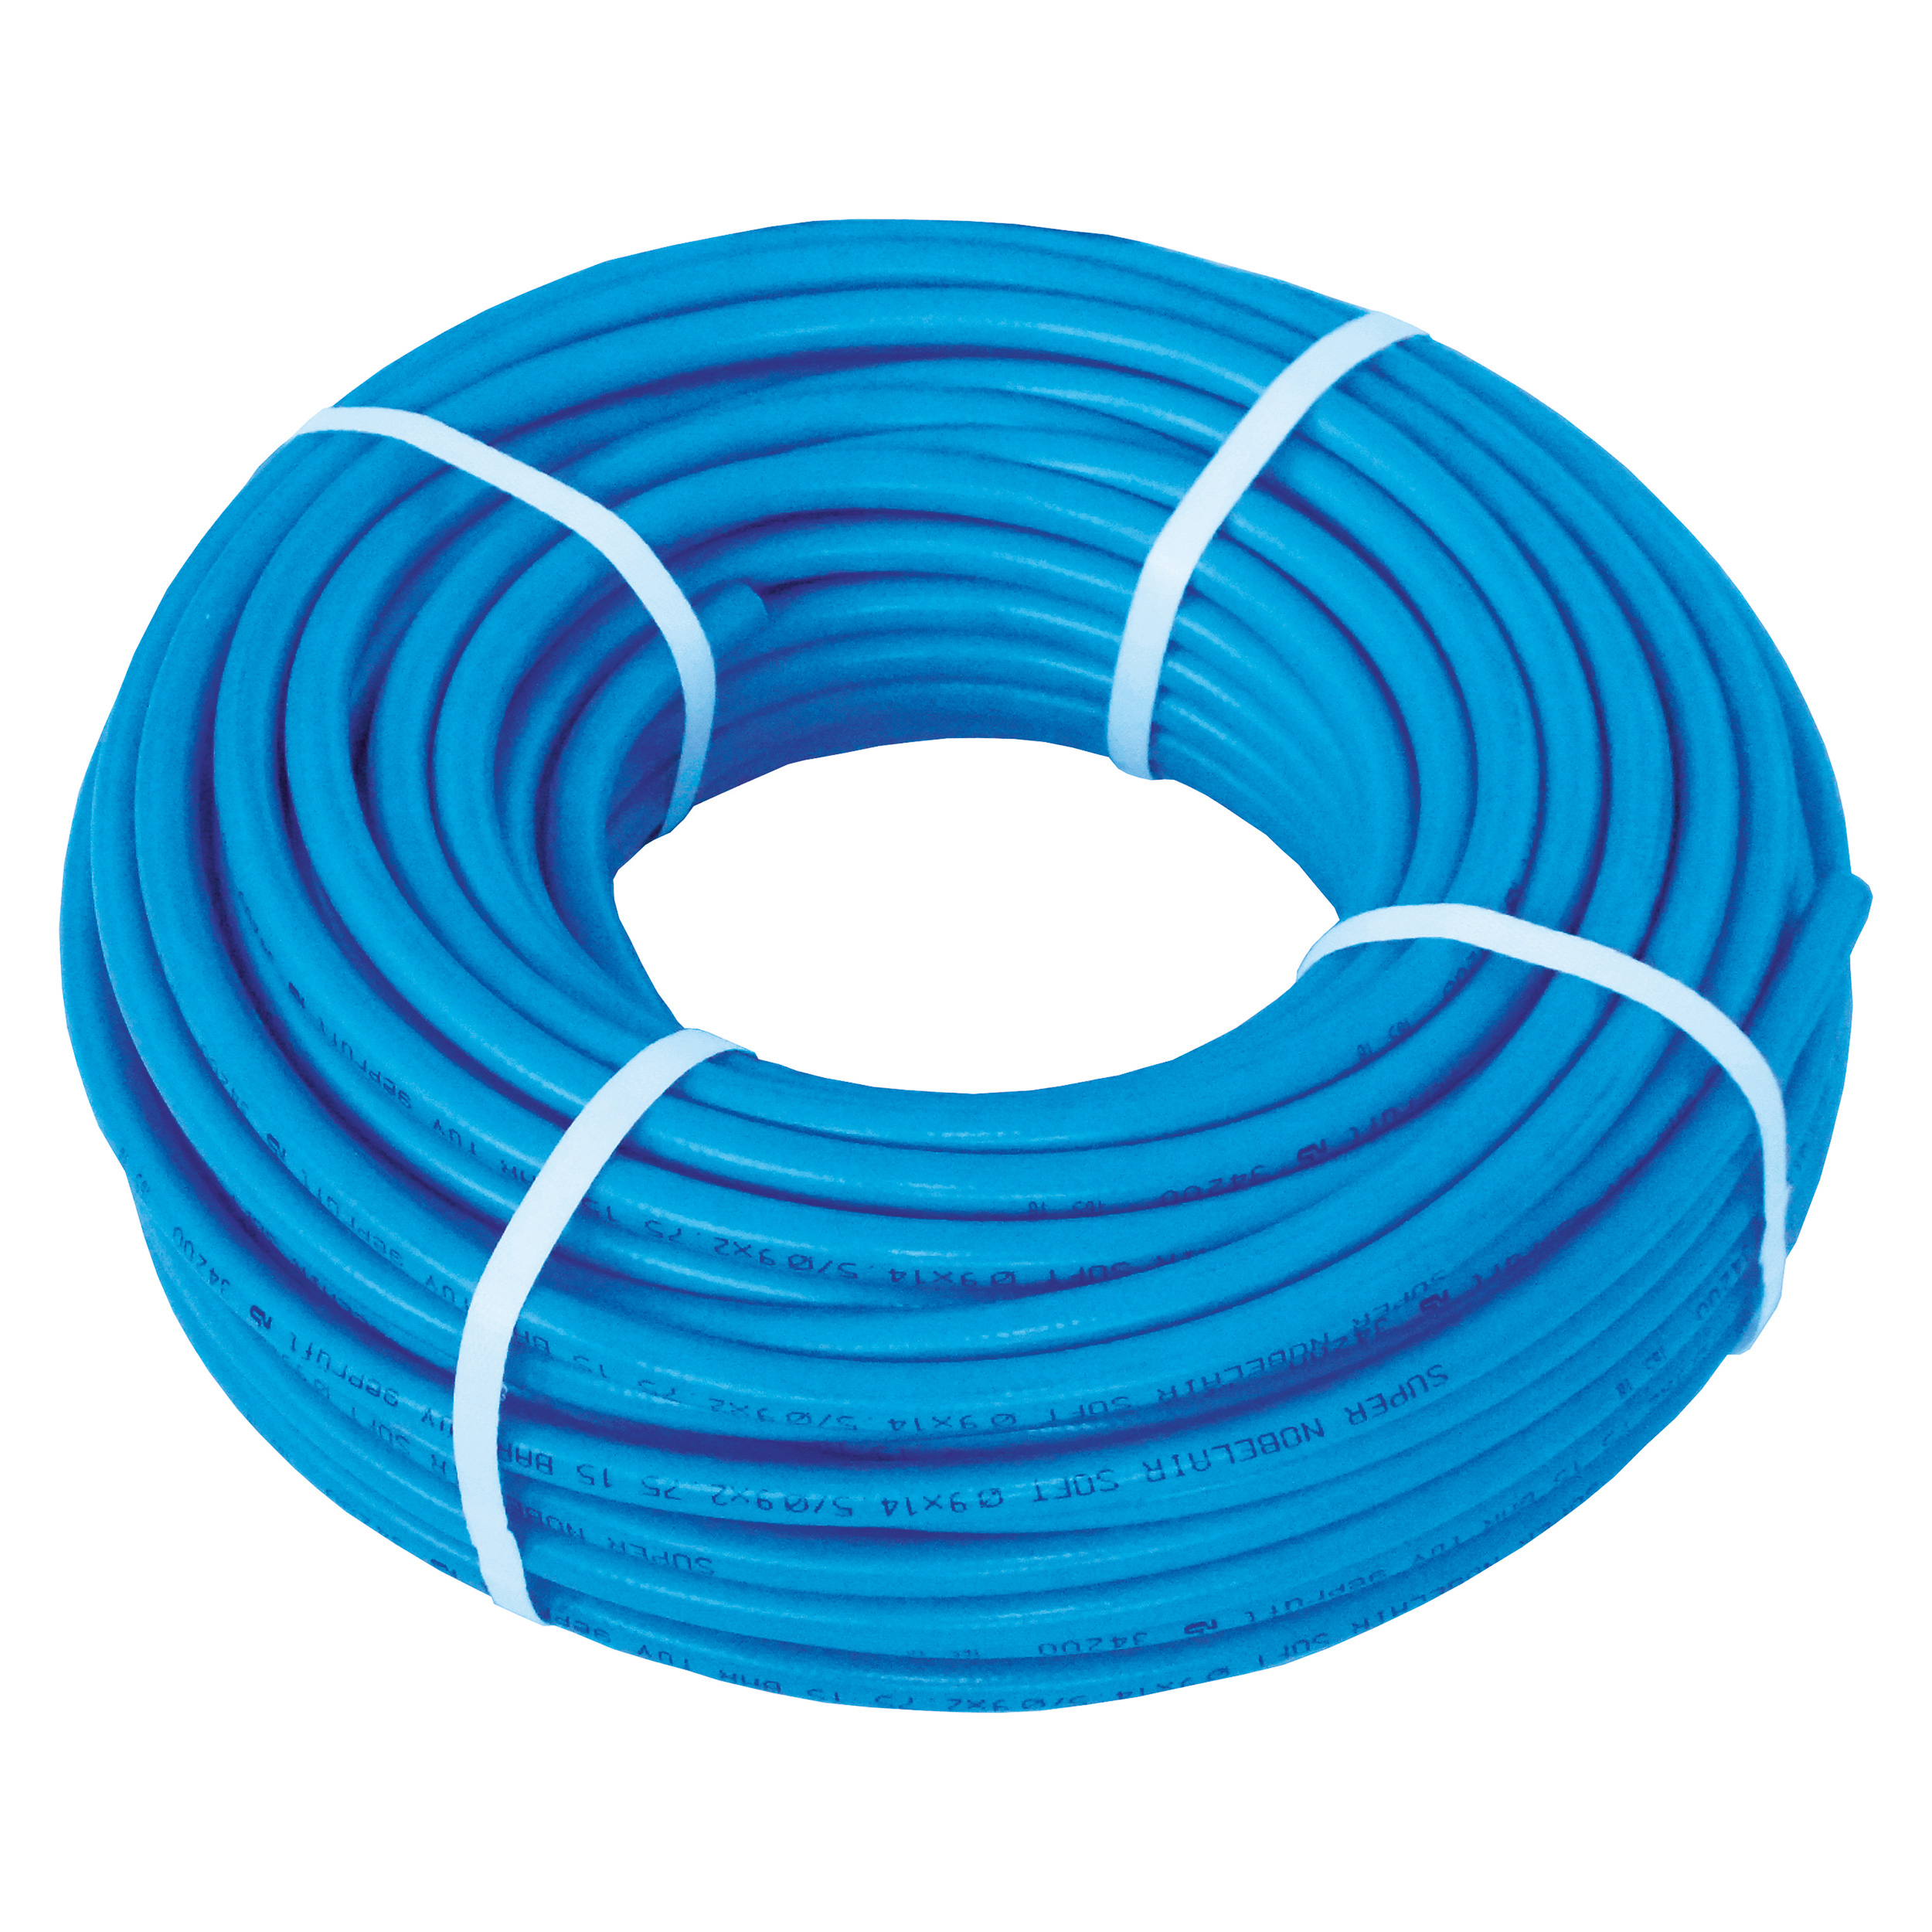 PVC compressed air hose SOFT, DN × s: Ø6.3 × 2.35 mm, BR 23 mm, MOP: compressed air 217.5 psi/water 290 psi, full roll, 50 m